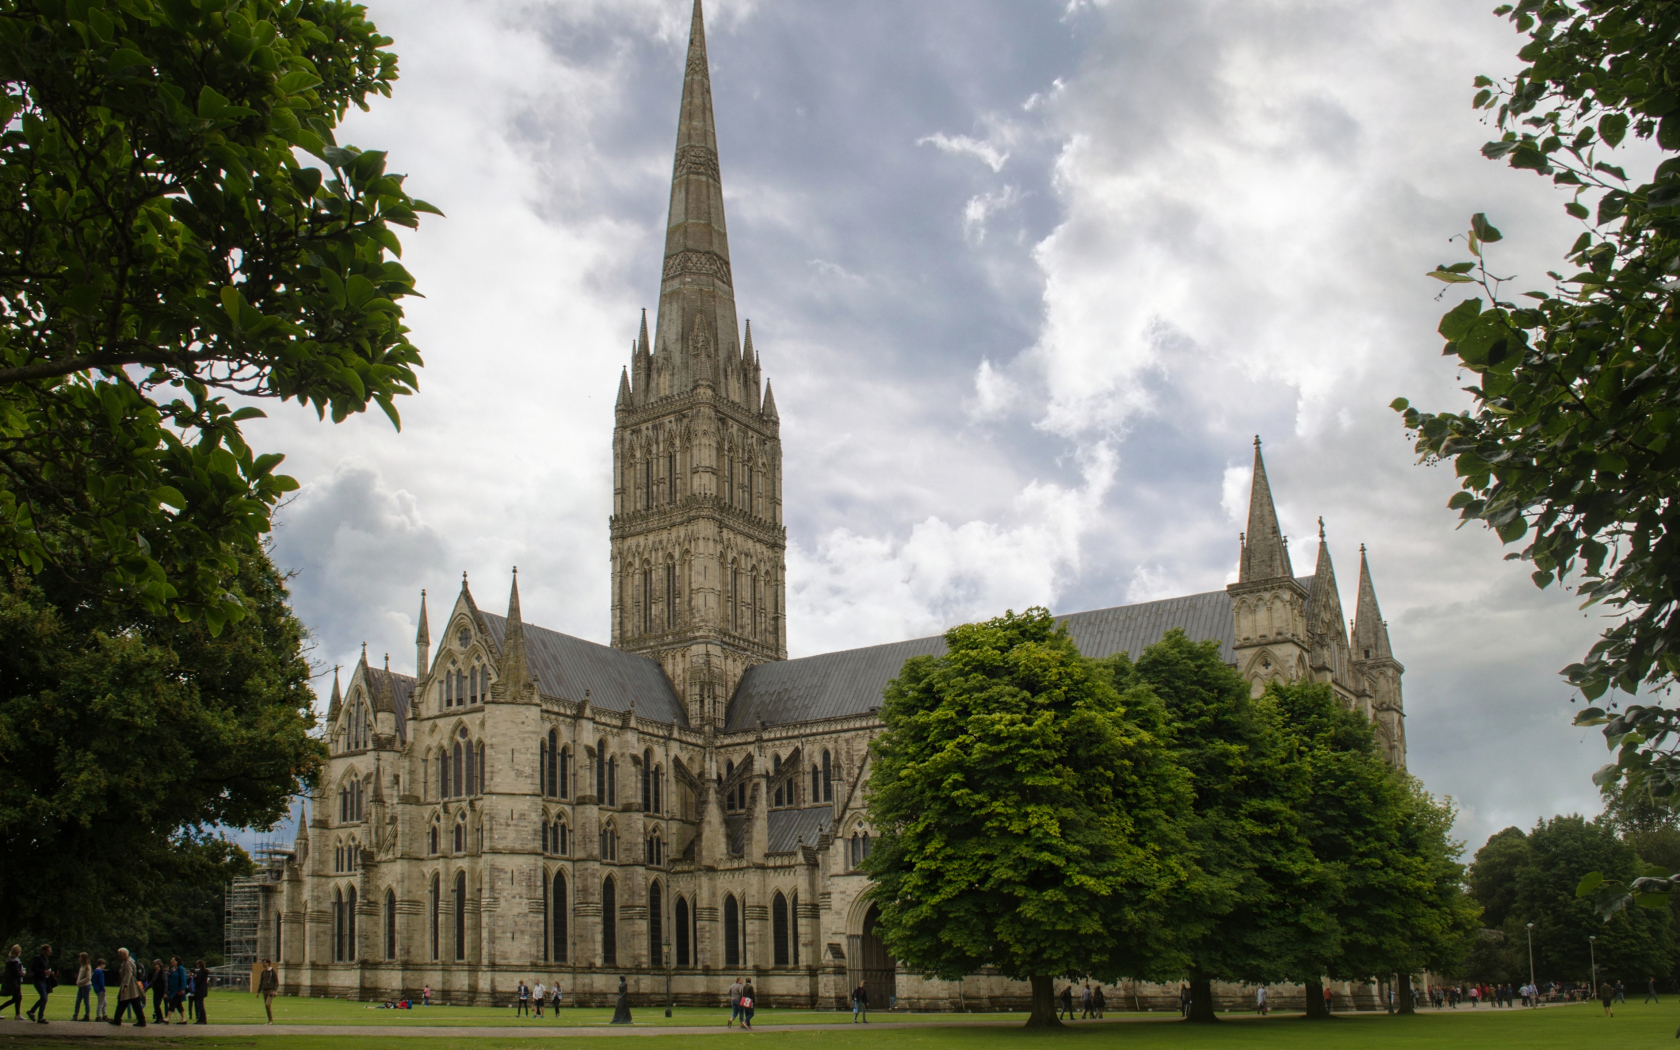 Ancient Salisbury cathedral against the sky, England